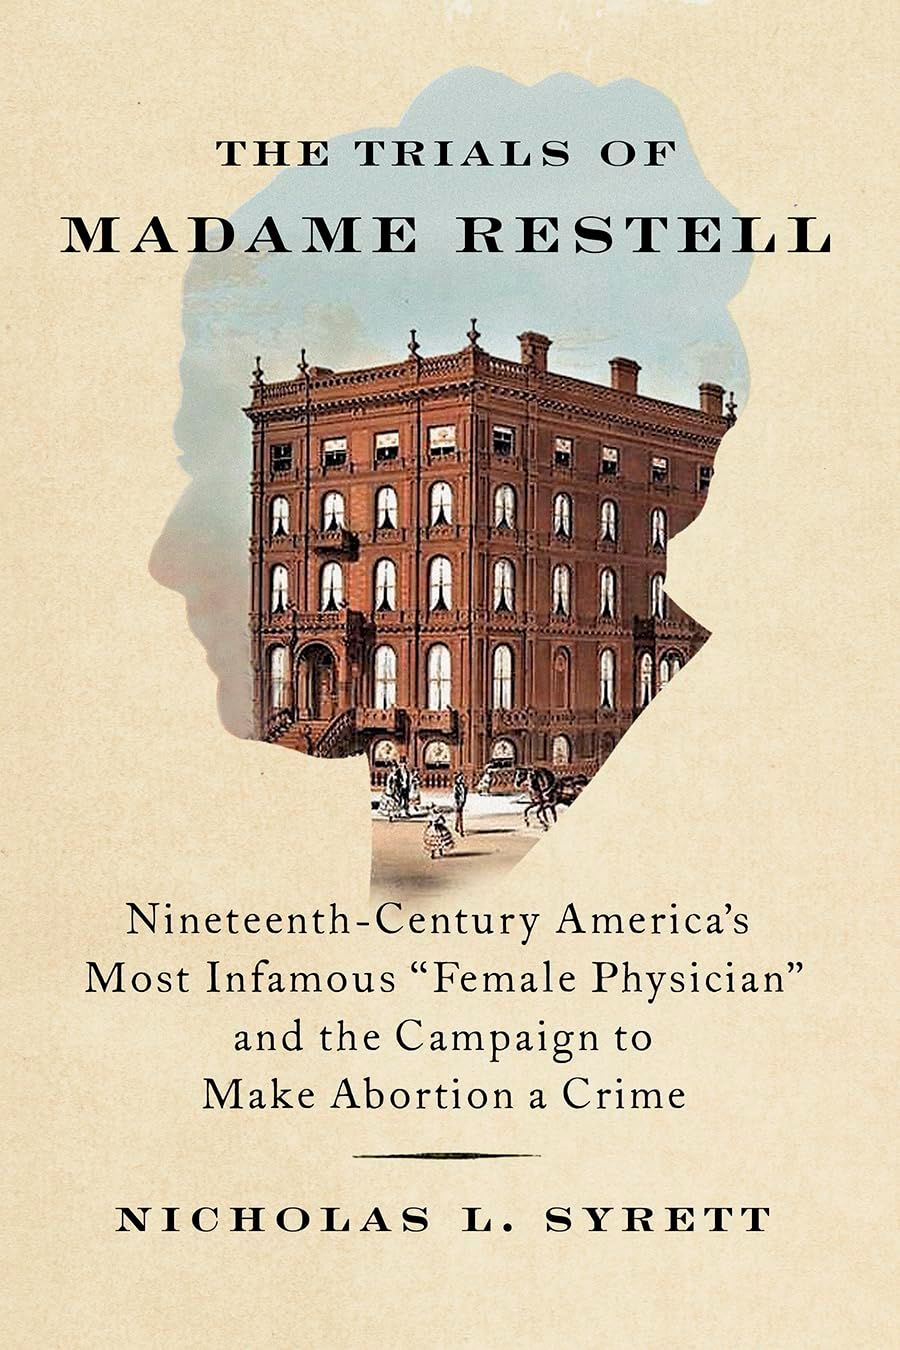 Abortion on Trial: On Nicholas L. Syrett’s “The Trials of Madame Restell”